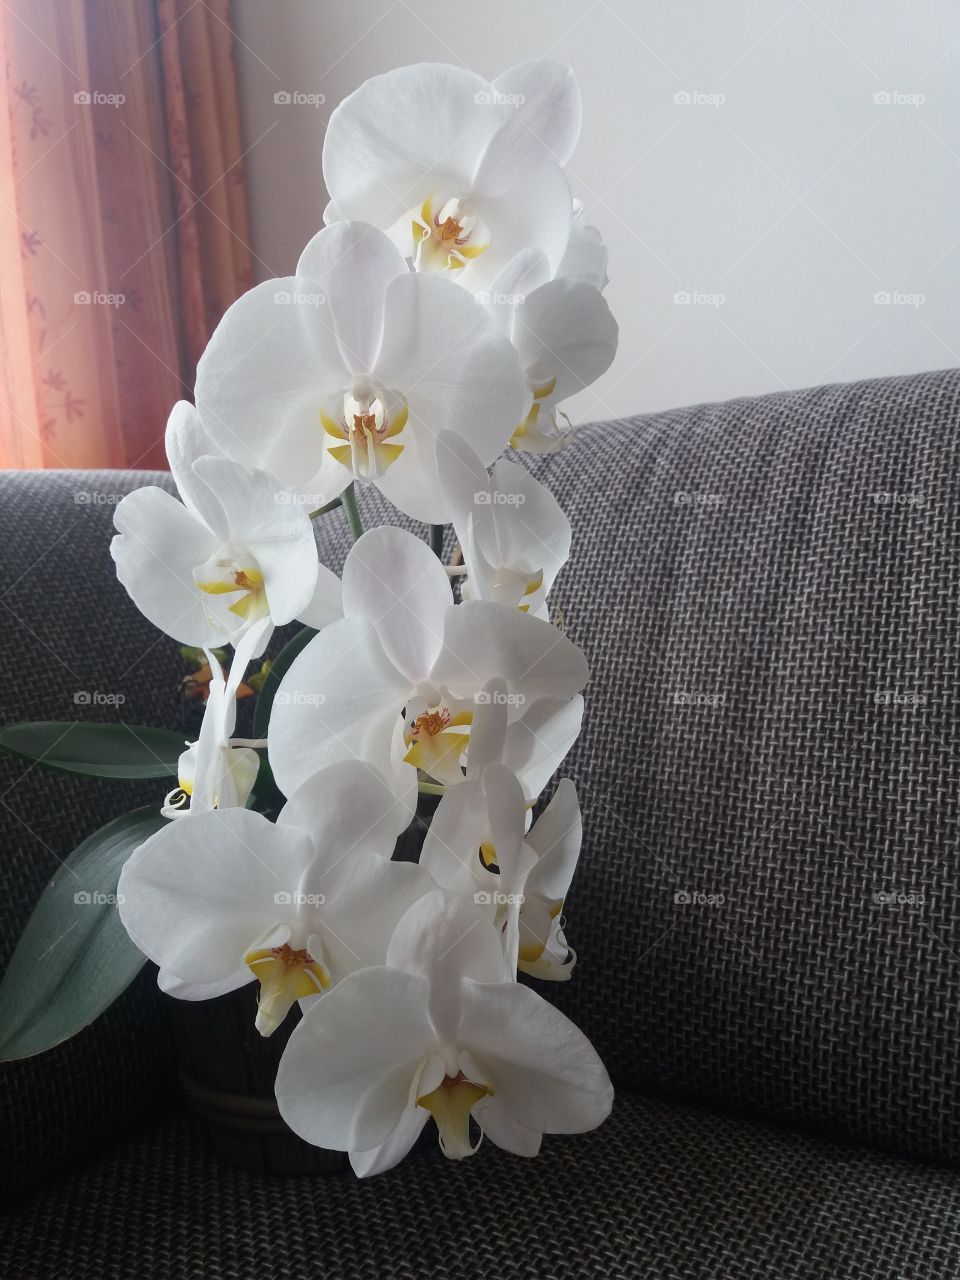 indoor plant, orchid